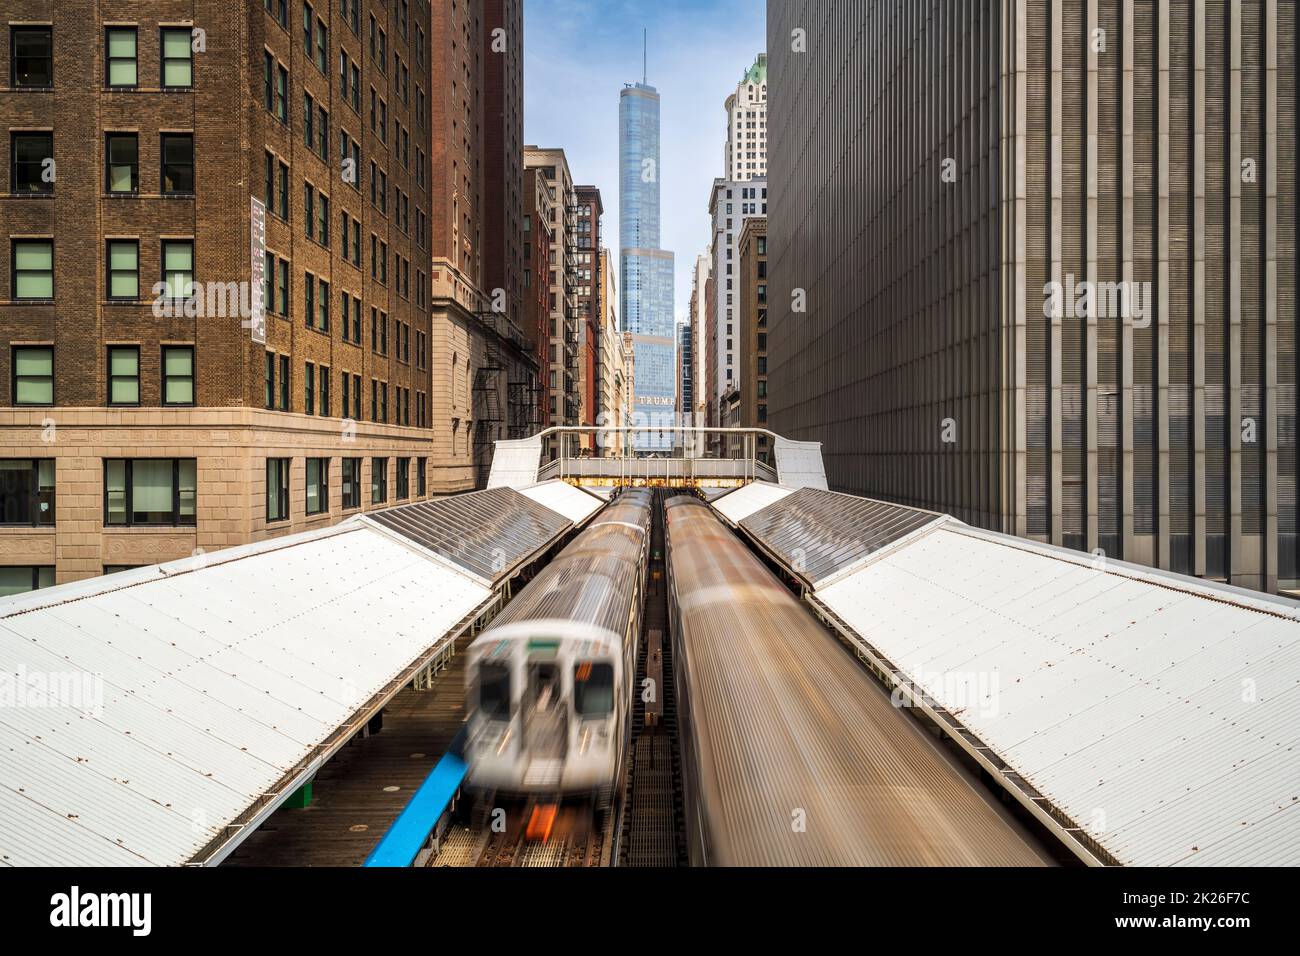 CTA's Red Line elevated train at Adams/Wabash station, Chicago, Illinois, USA Stock Photo